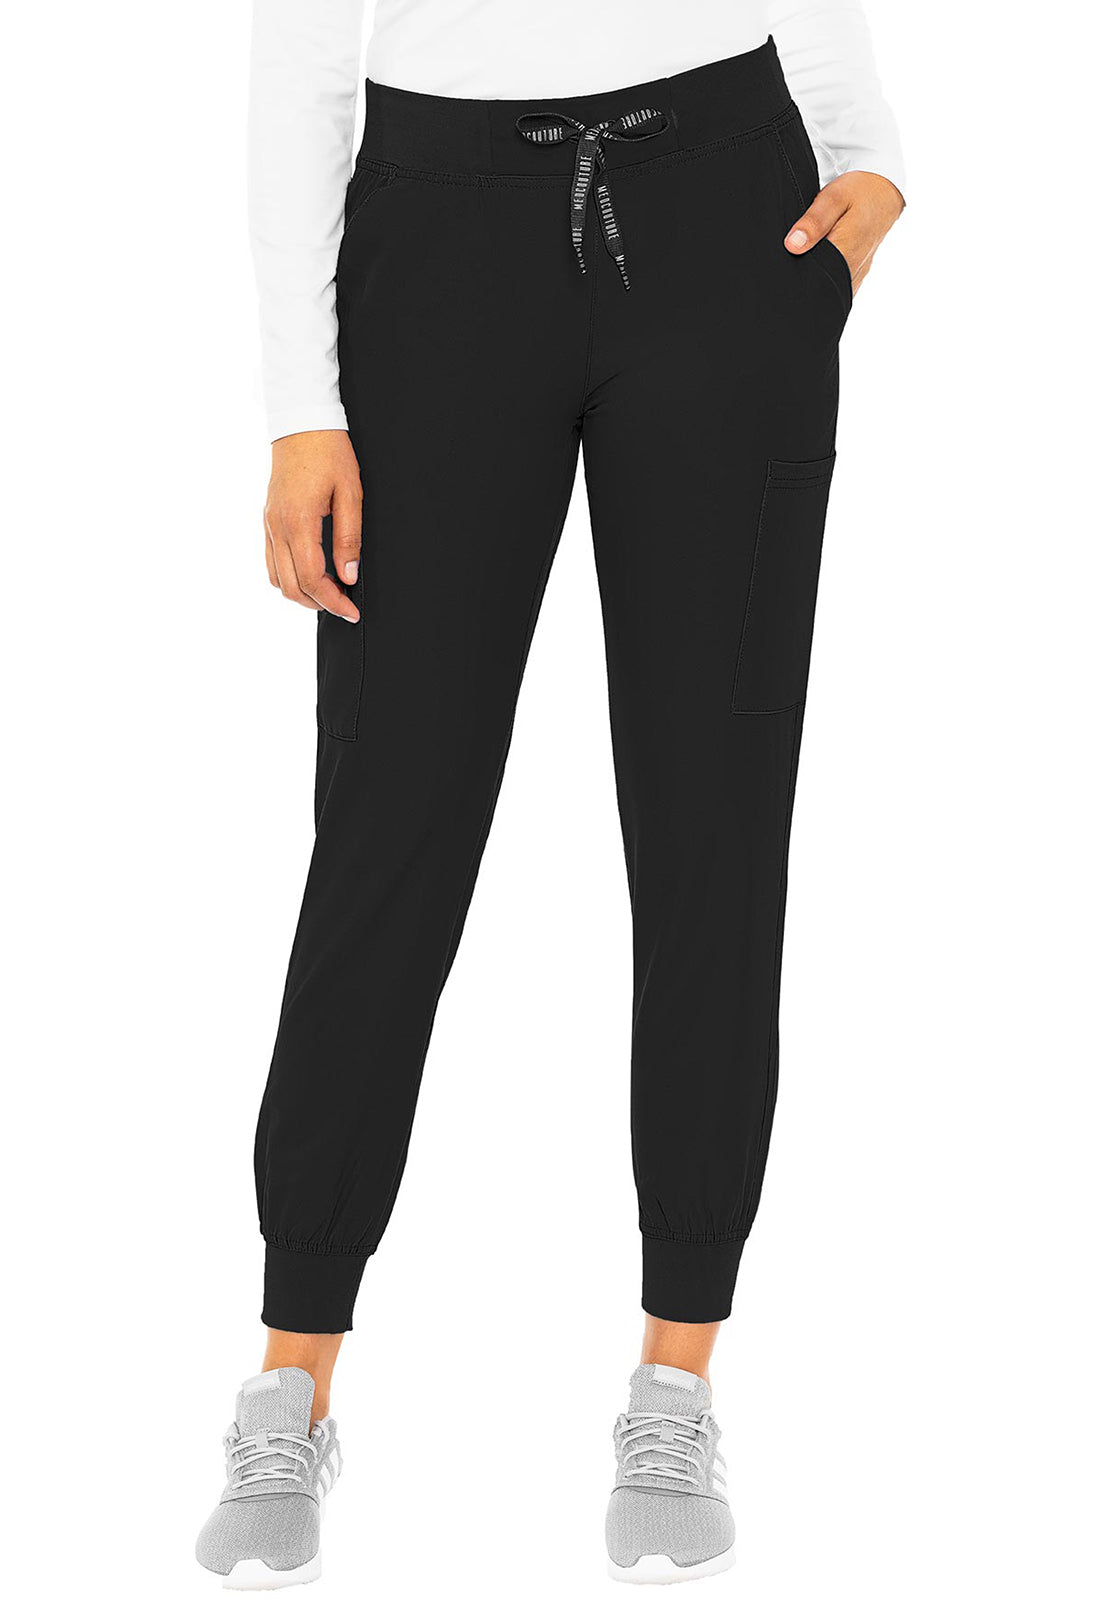 Women's Med Couture Insight Jogger